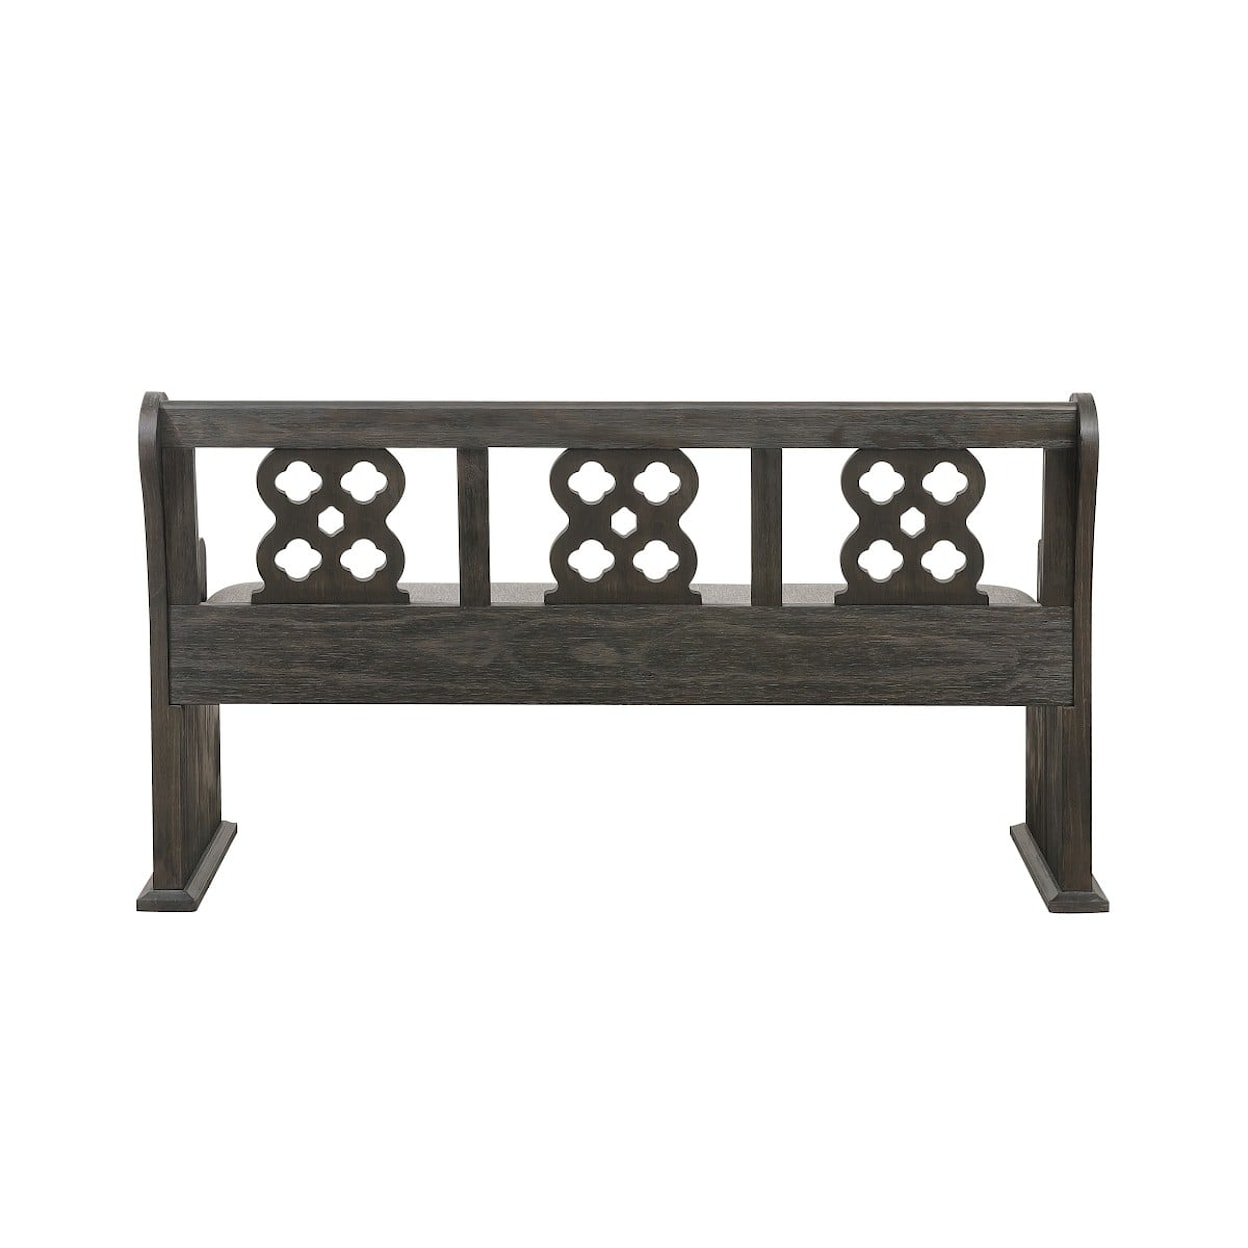 Homelegance Arasina Bench with Curved Arms